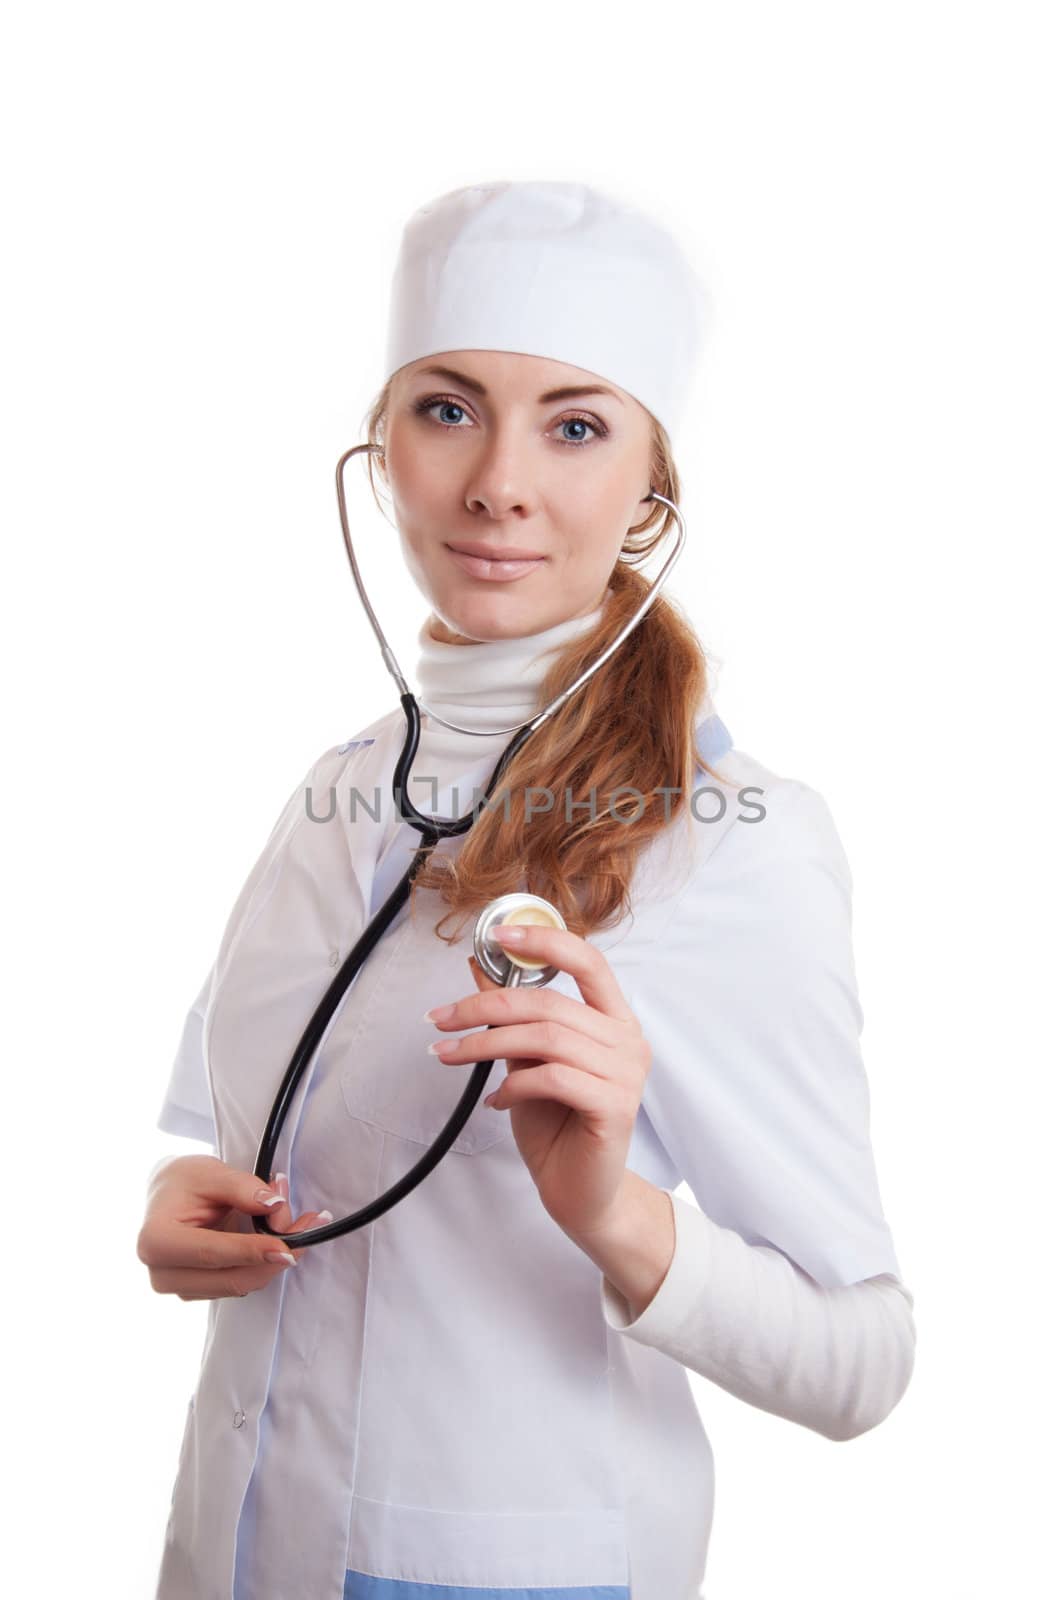 Medical doctor woman with stethoscope by Angel_a